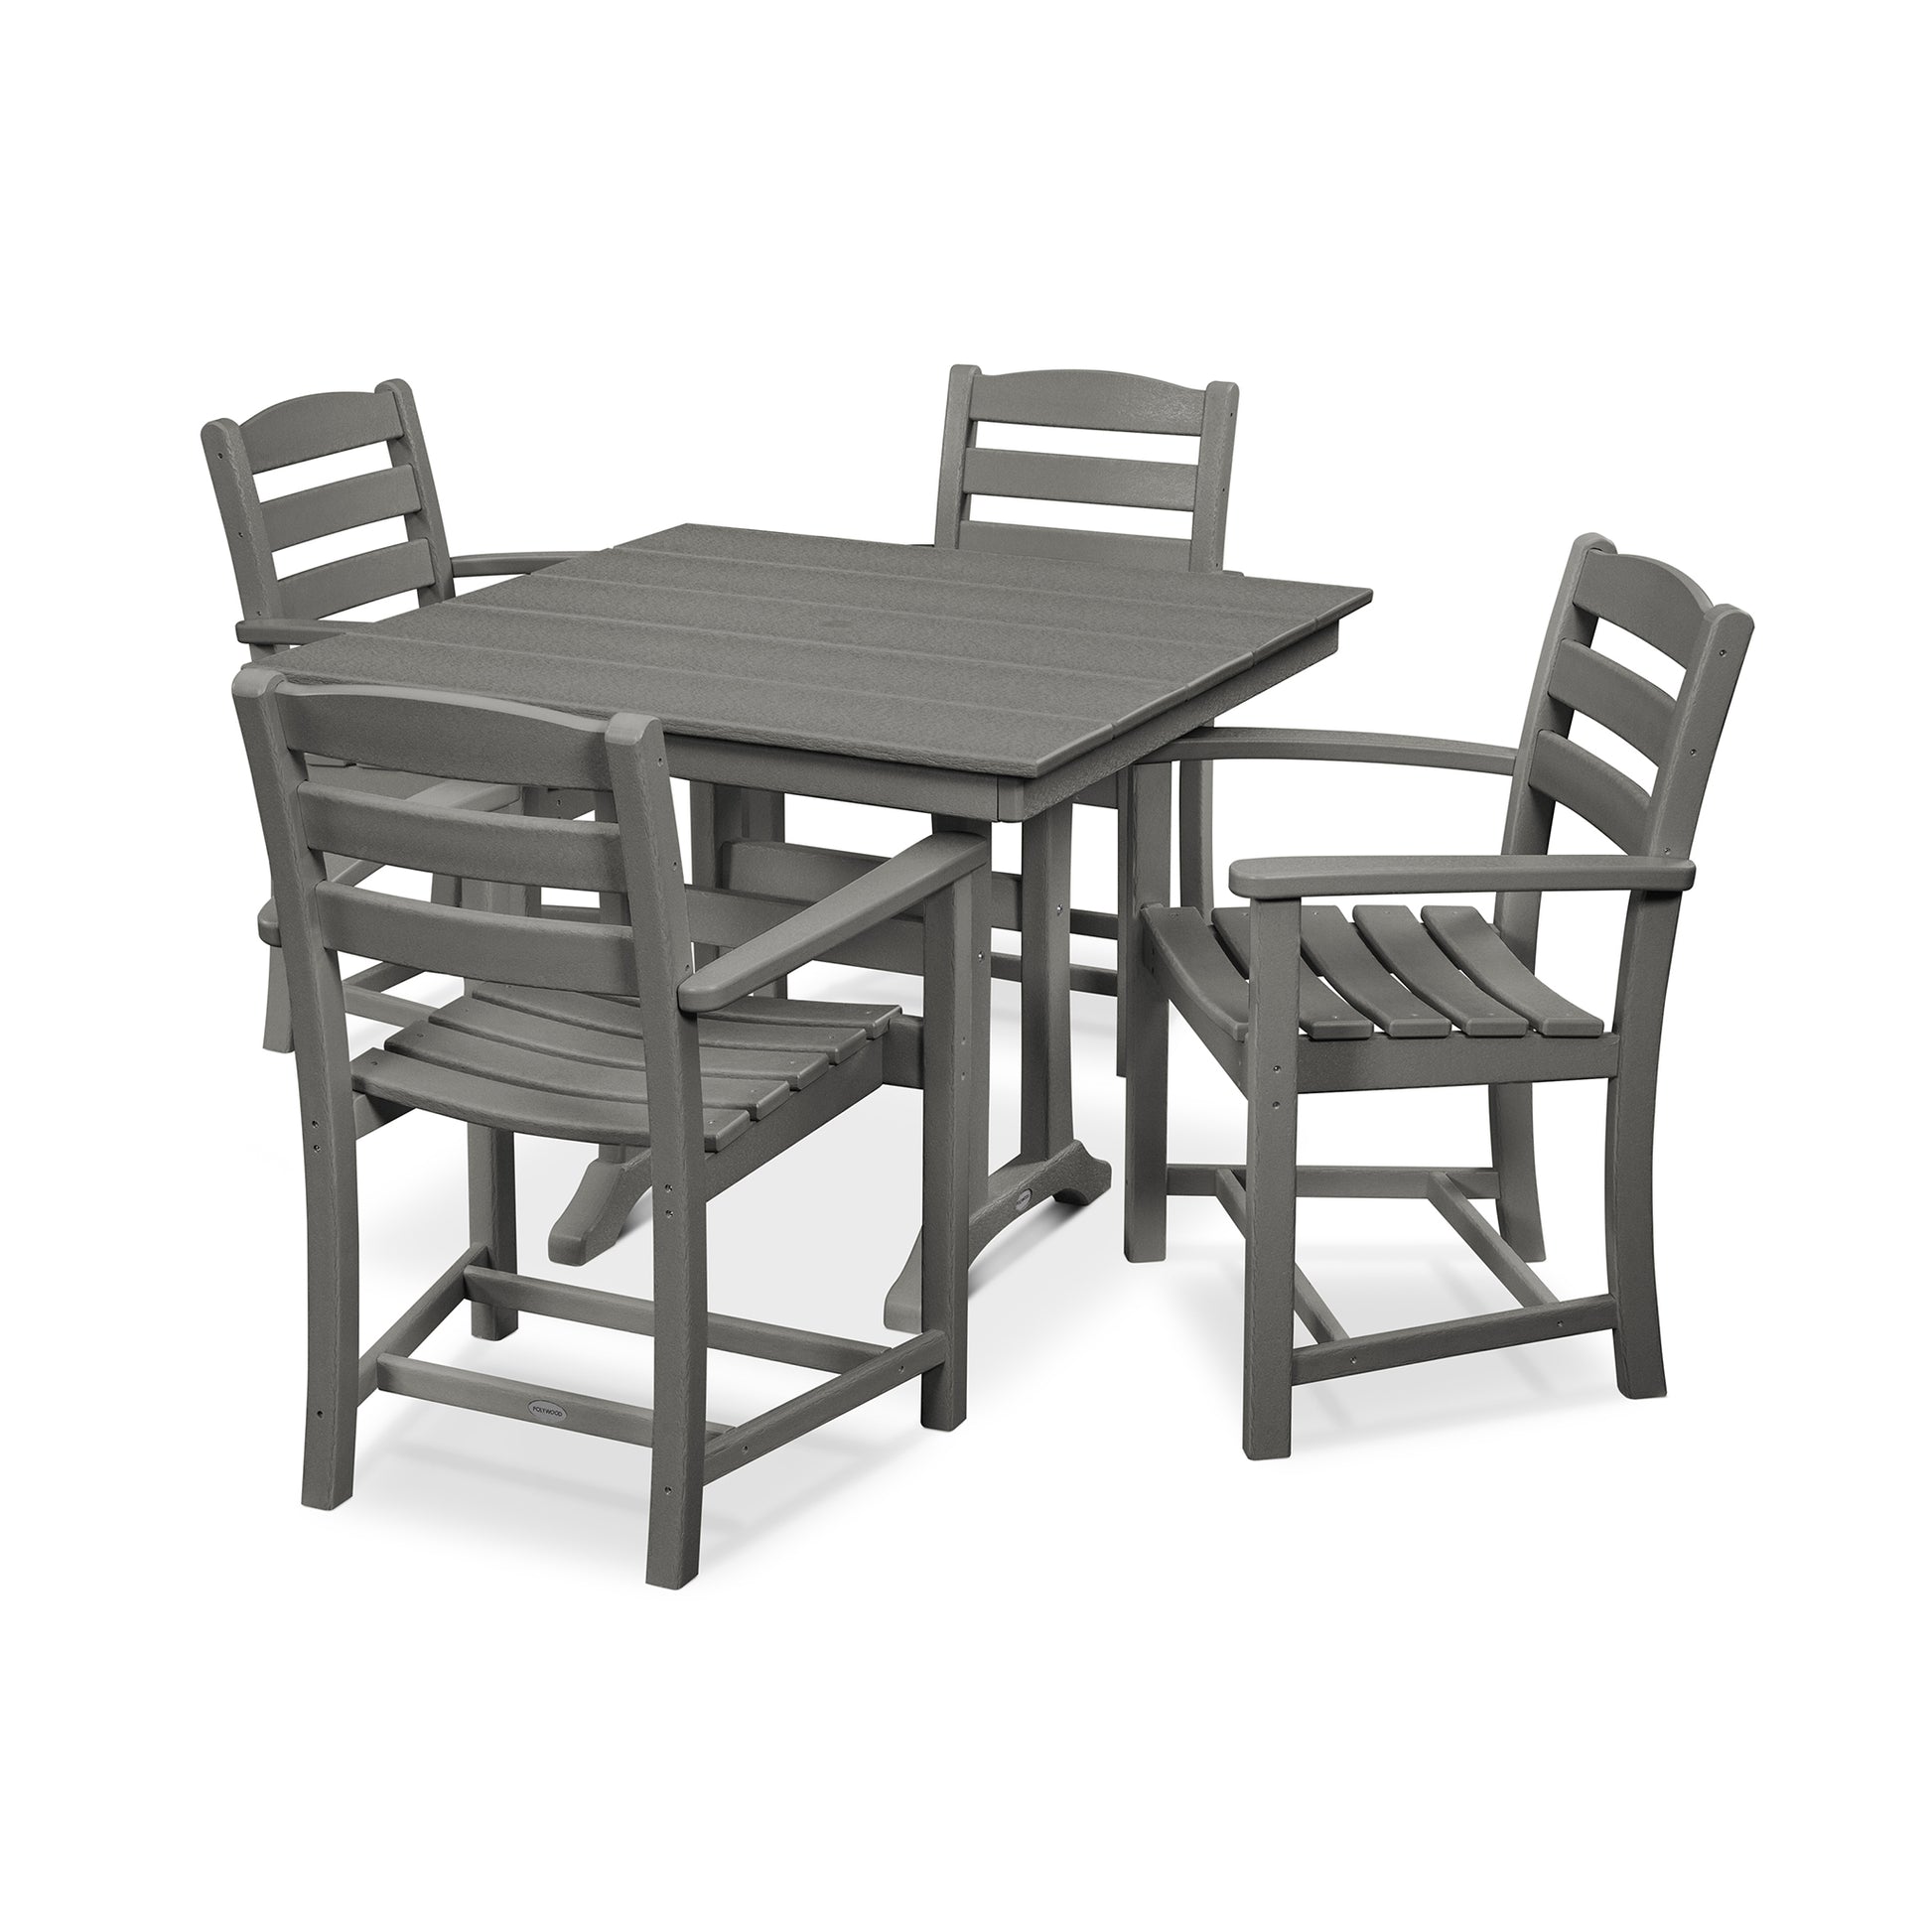 A five-piece outdoor dining set featuring a farmhouse trestle table and four arm chairs, all made of weather-resistant POLYWOOD® lumber, isolated on a white background.